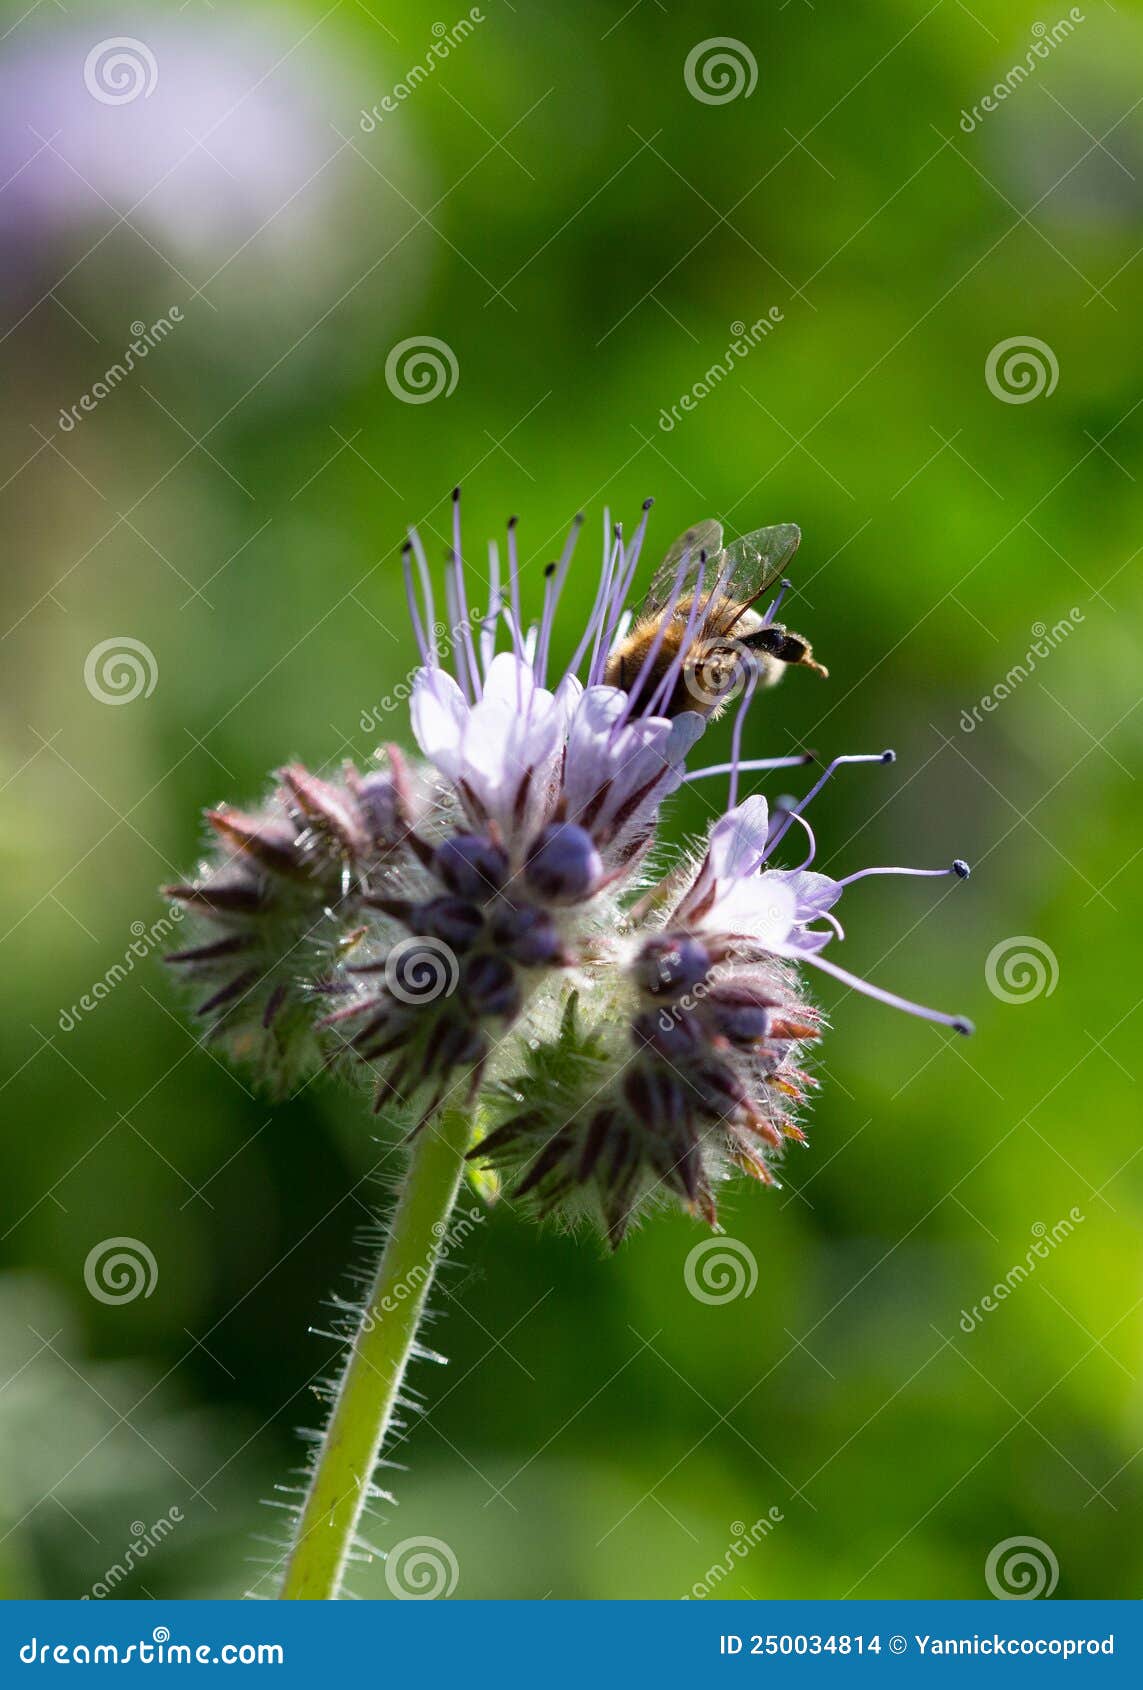 bee gathering pollen from a phacelia flower